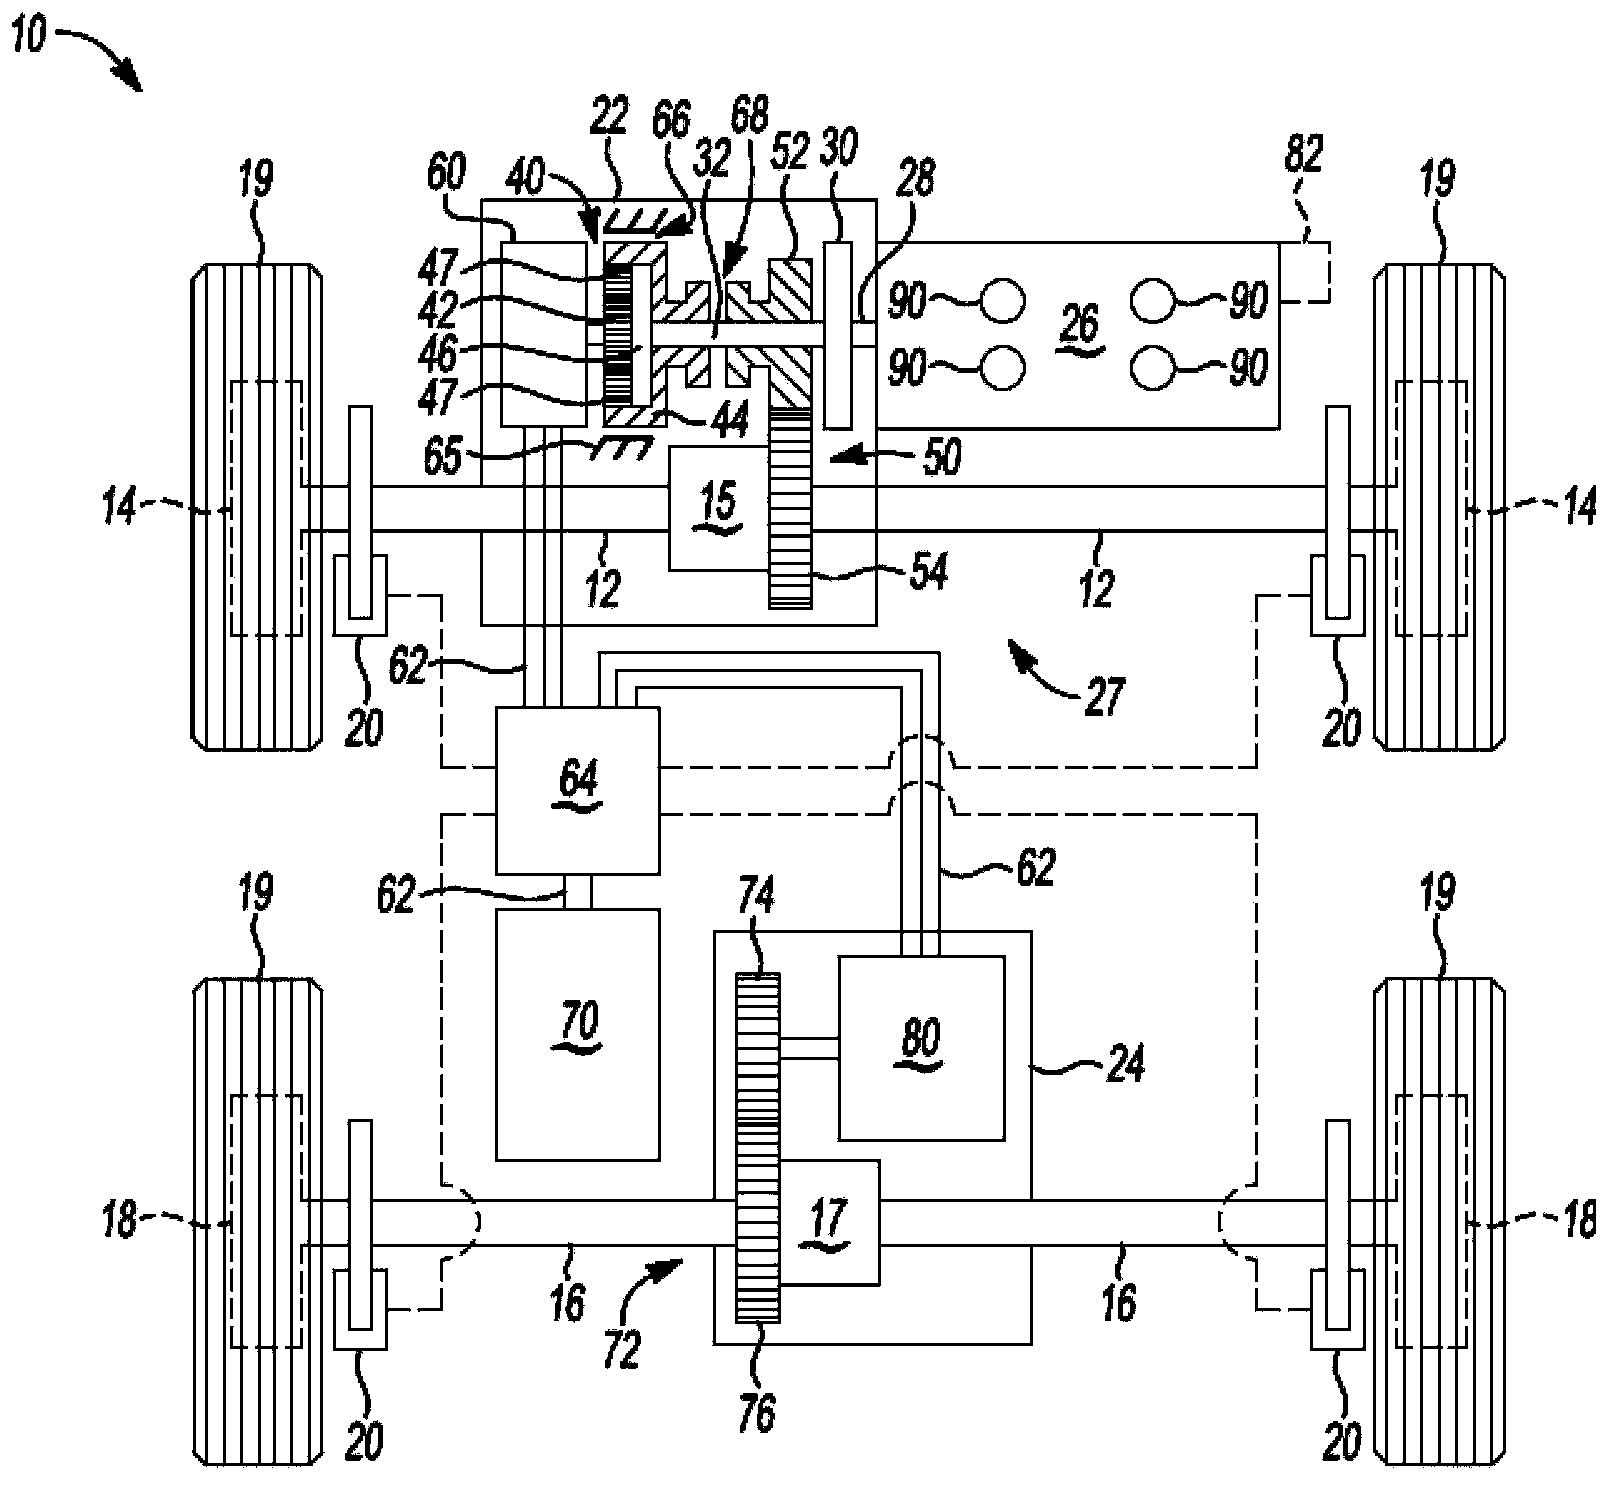 Hybrid vehicle with electric transmission and electric drive module